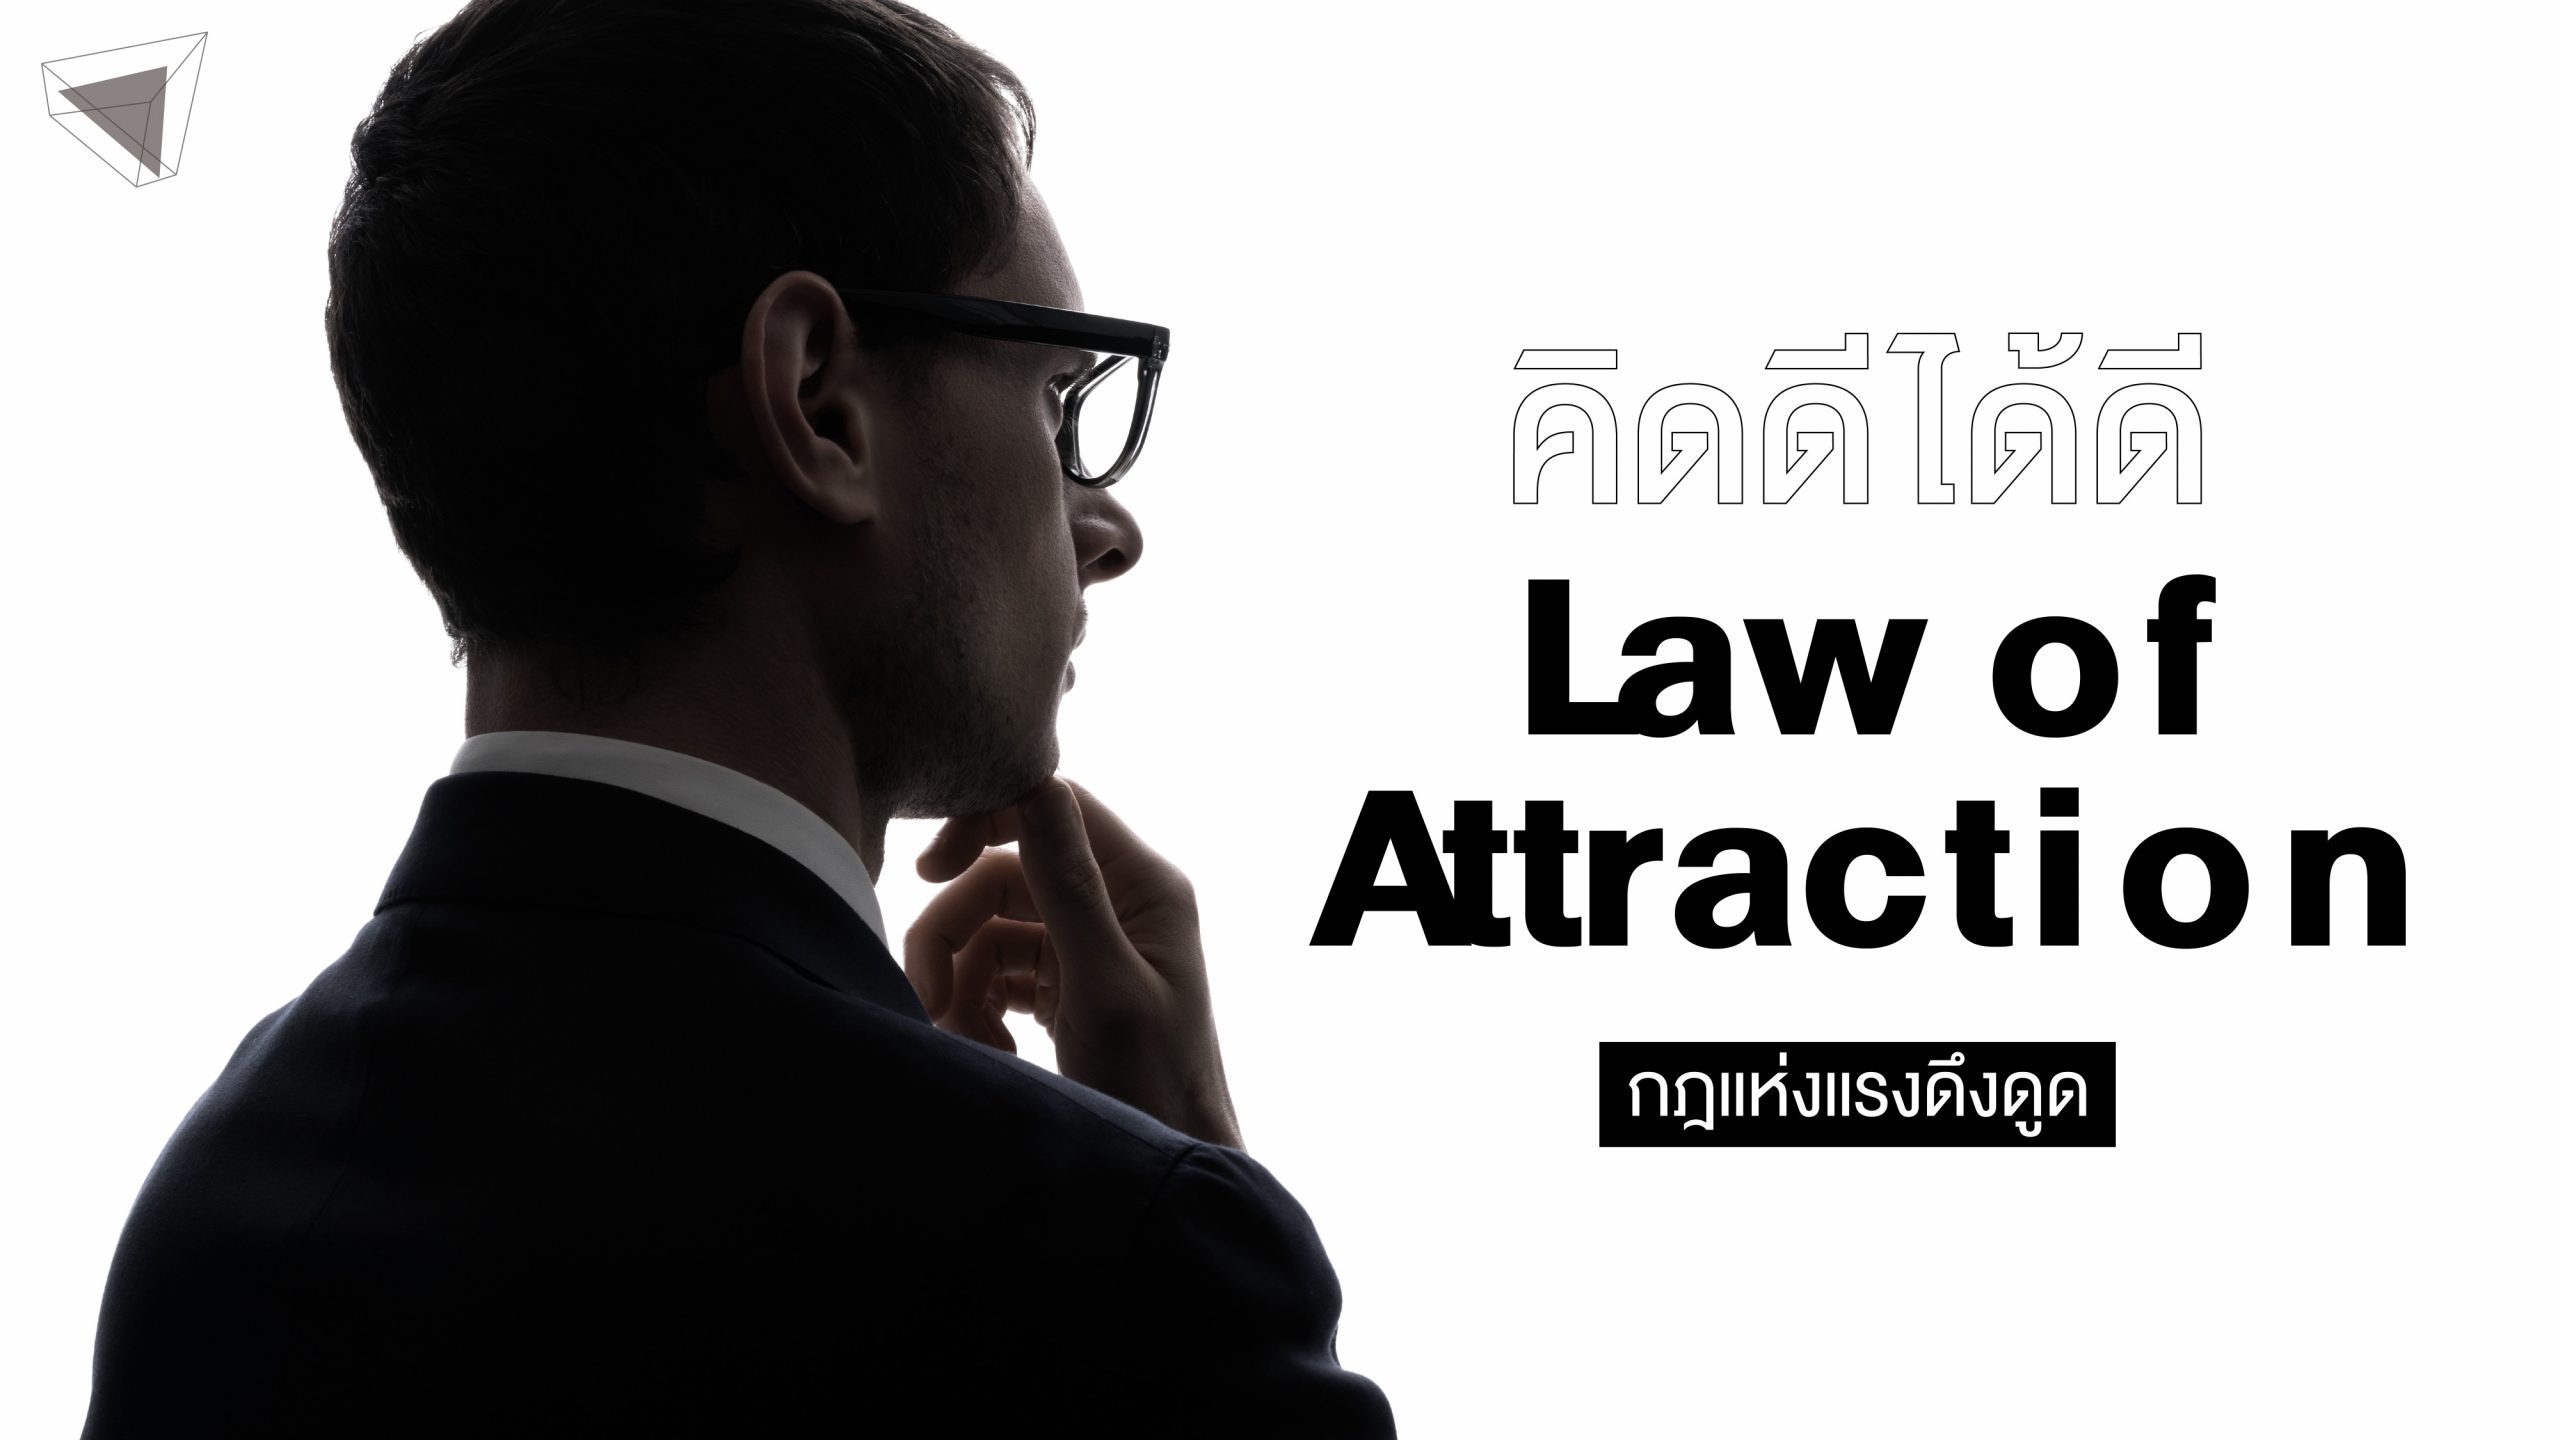 Law of Attraction คือ